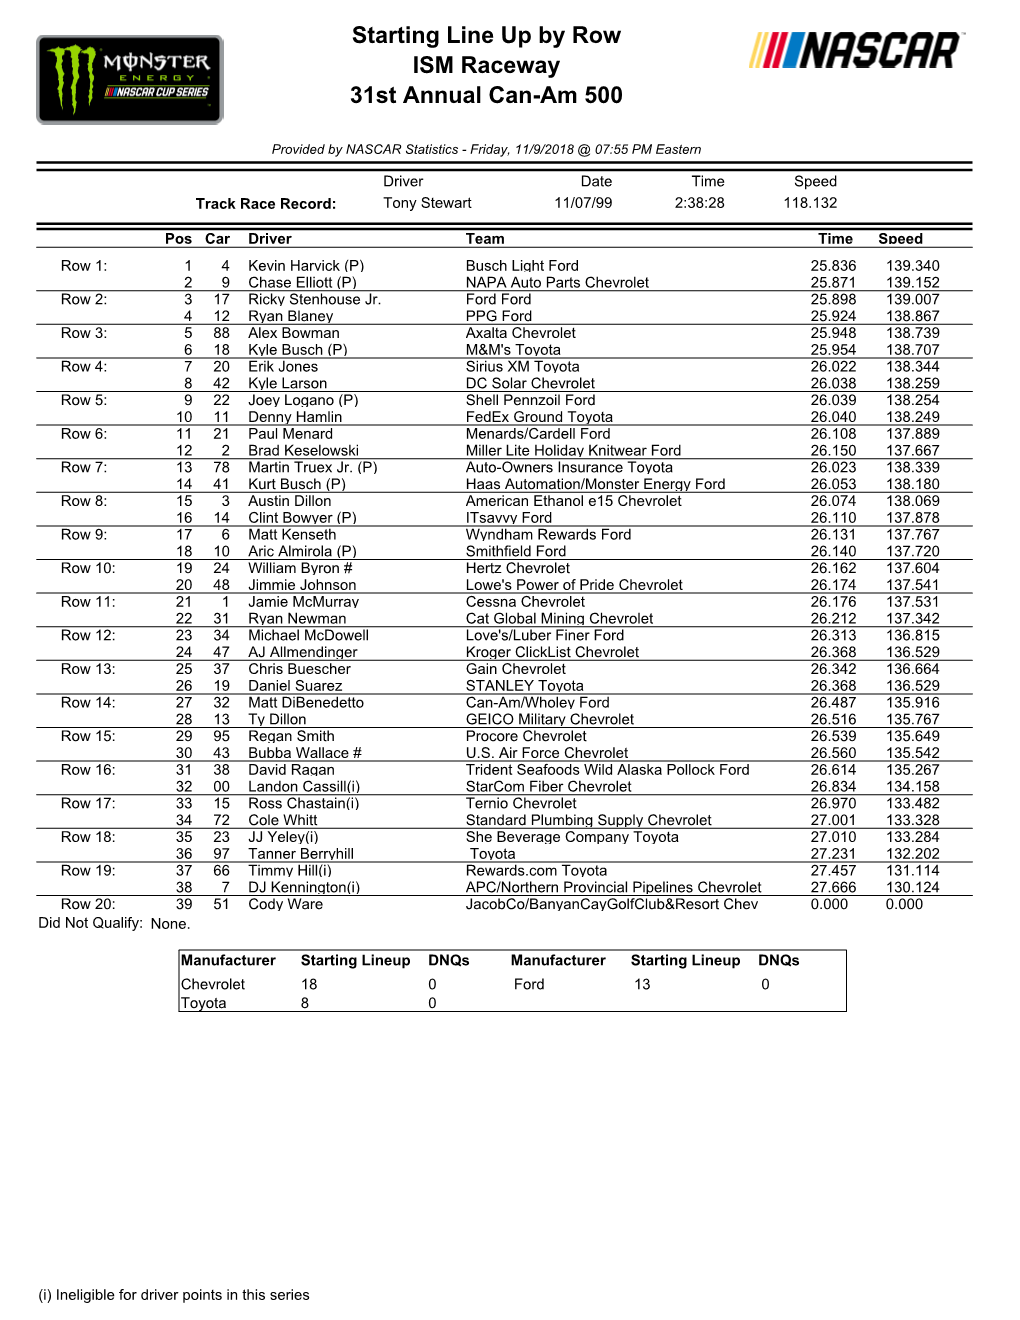 Starting Line up by Row ISM Raceway 31St Annual Can-Am 500